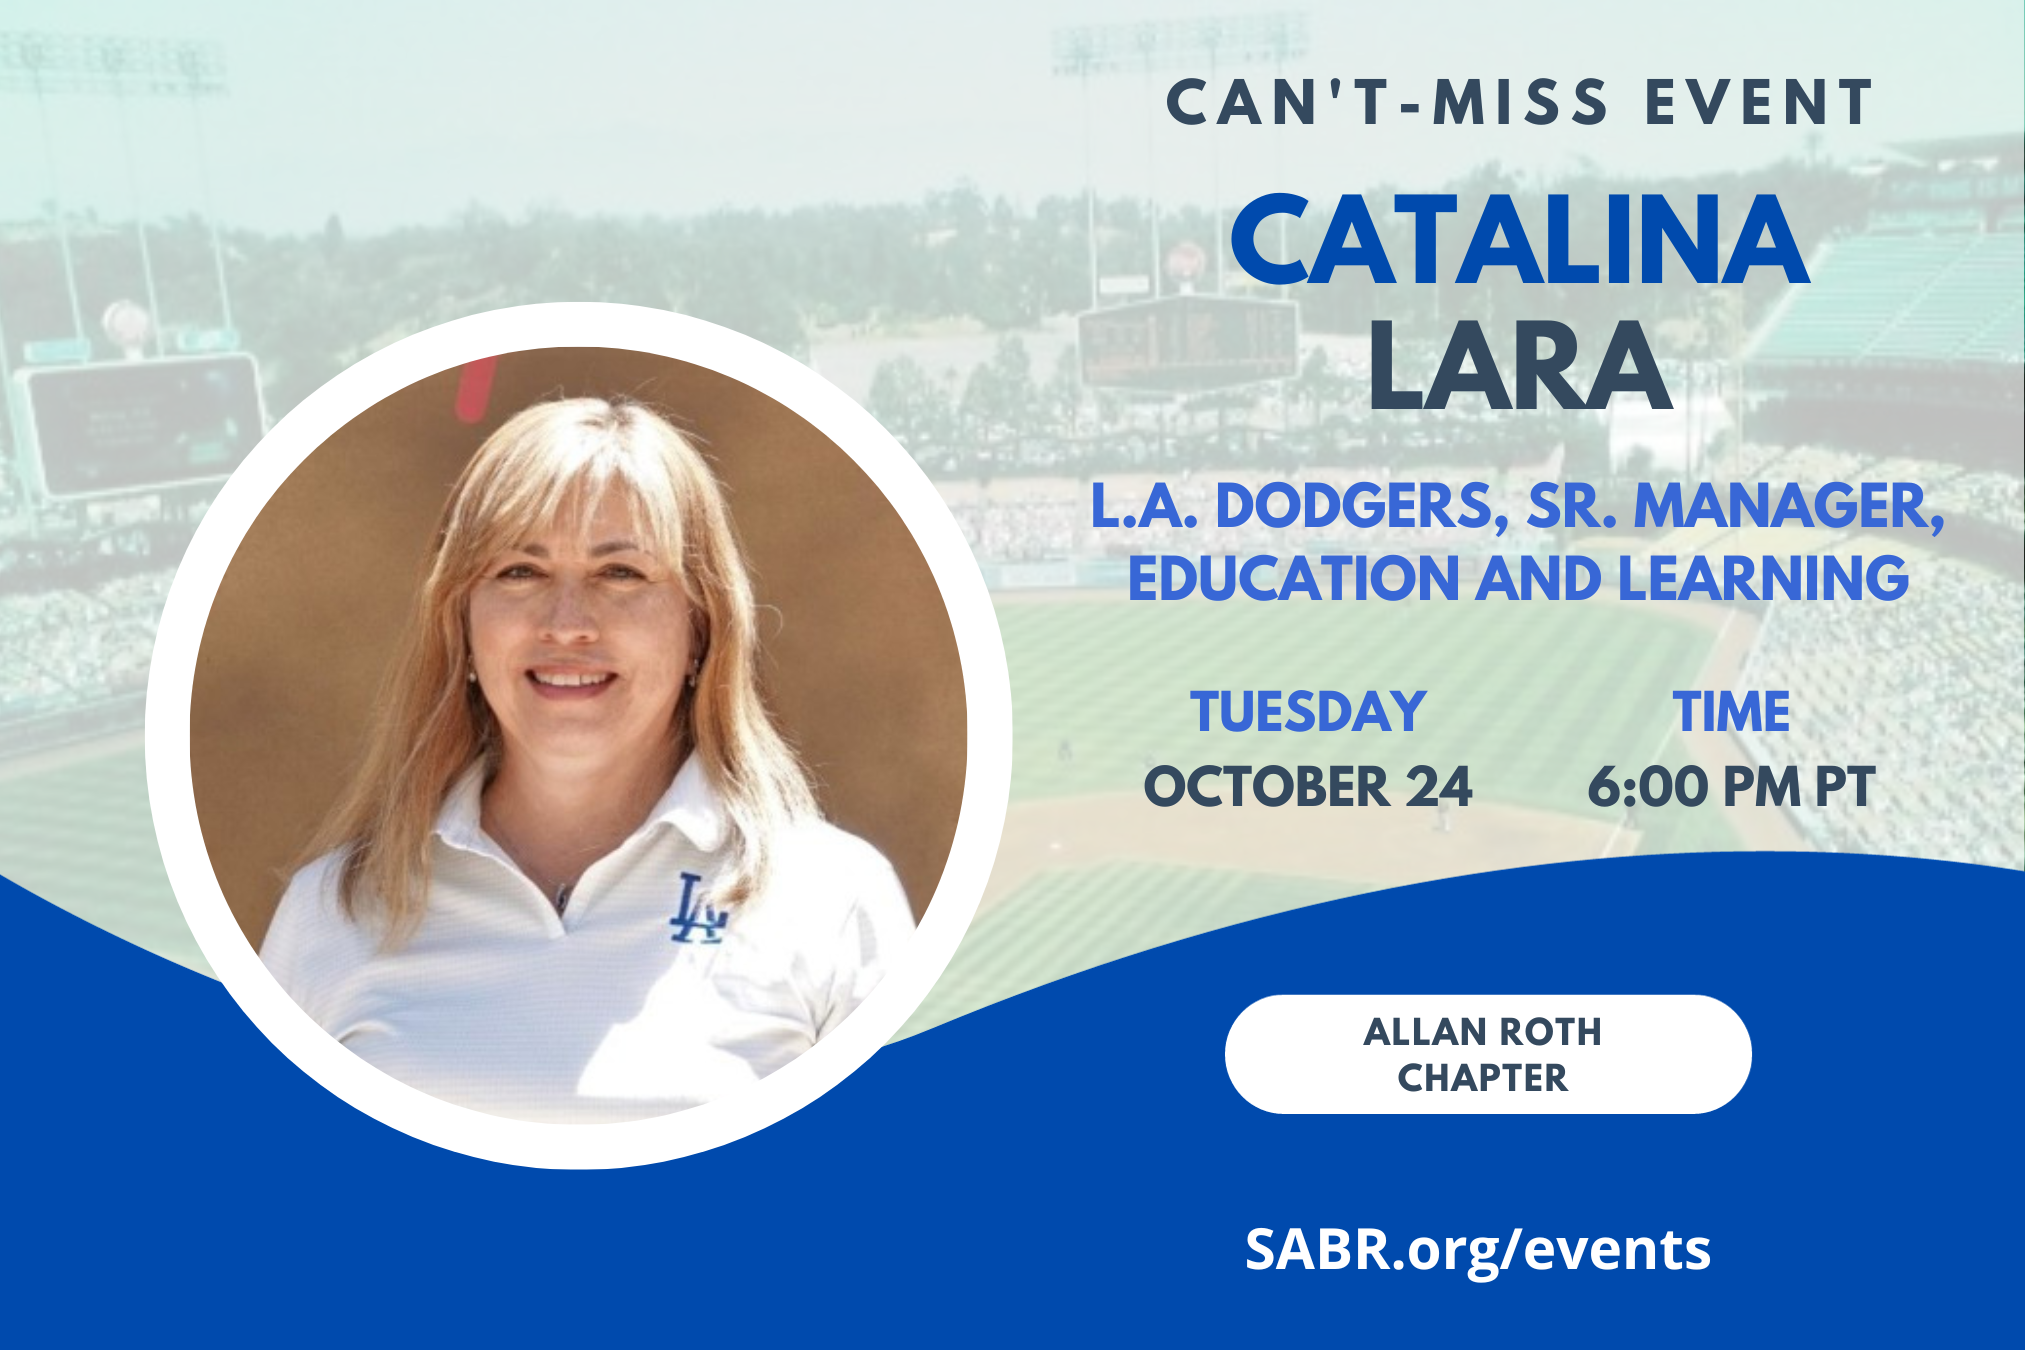 SABR's Allan Roth Chapter in Los Angeles will hold a virtual Zoom meeting at 6:00 p.m. PT on Tuesday, October 24, 2023. All baseball fans are invited to attend. Our first speaker will be Dr. Catalina Lara, Senior Manager, Education and Learning - Minor Leagues for the Los Angeles Dodgers. Dr. Lara provides Life Skills coaching for American and International Players. Our second speaker is Erik Sherman, author of "Daybreak at Chavez Ravine: Fernandomania and the Remaking of the Los Angeles Dodgers". 